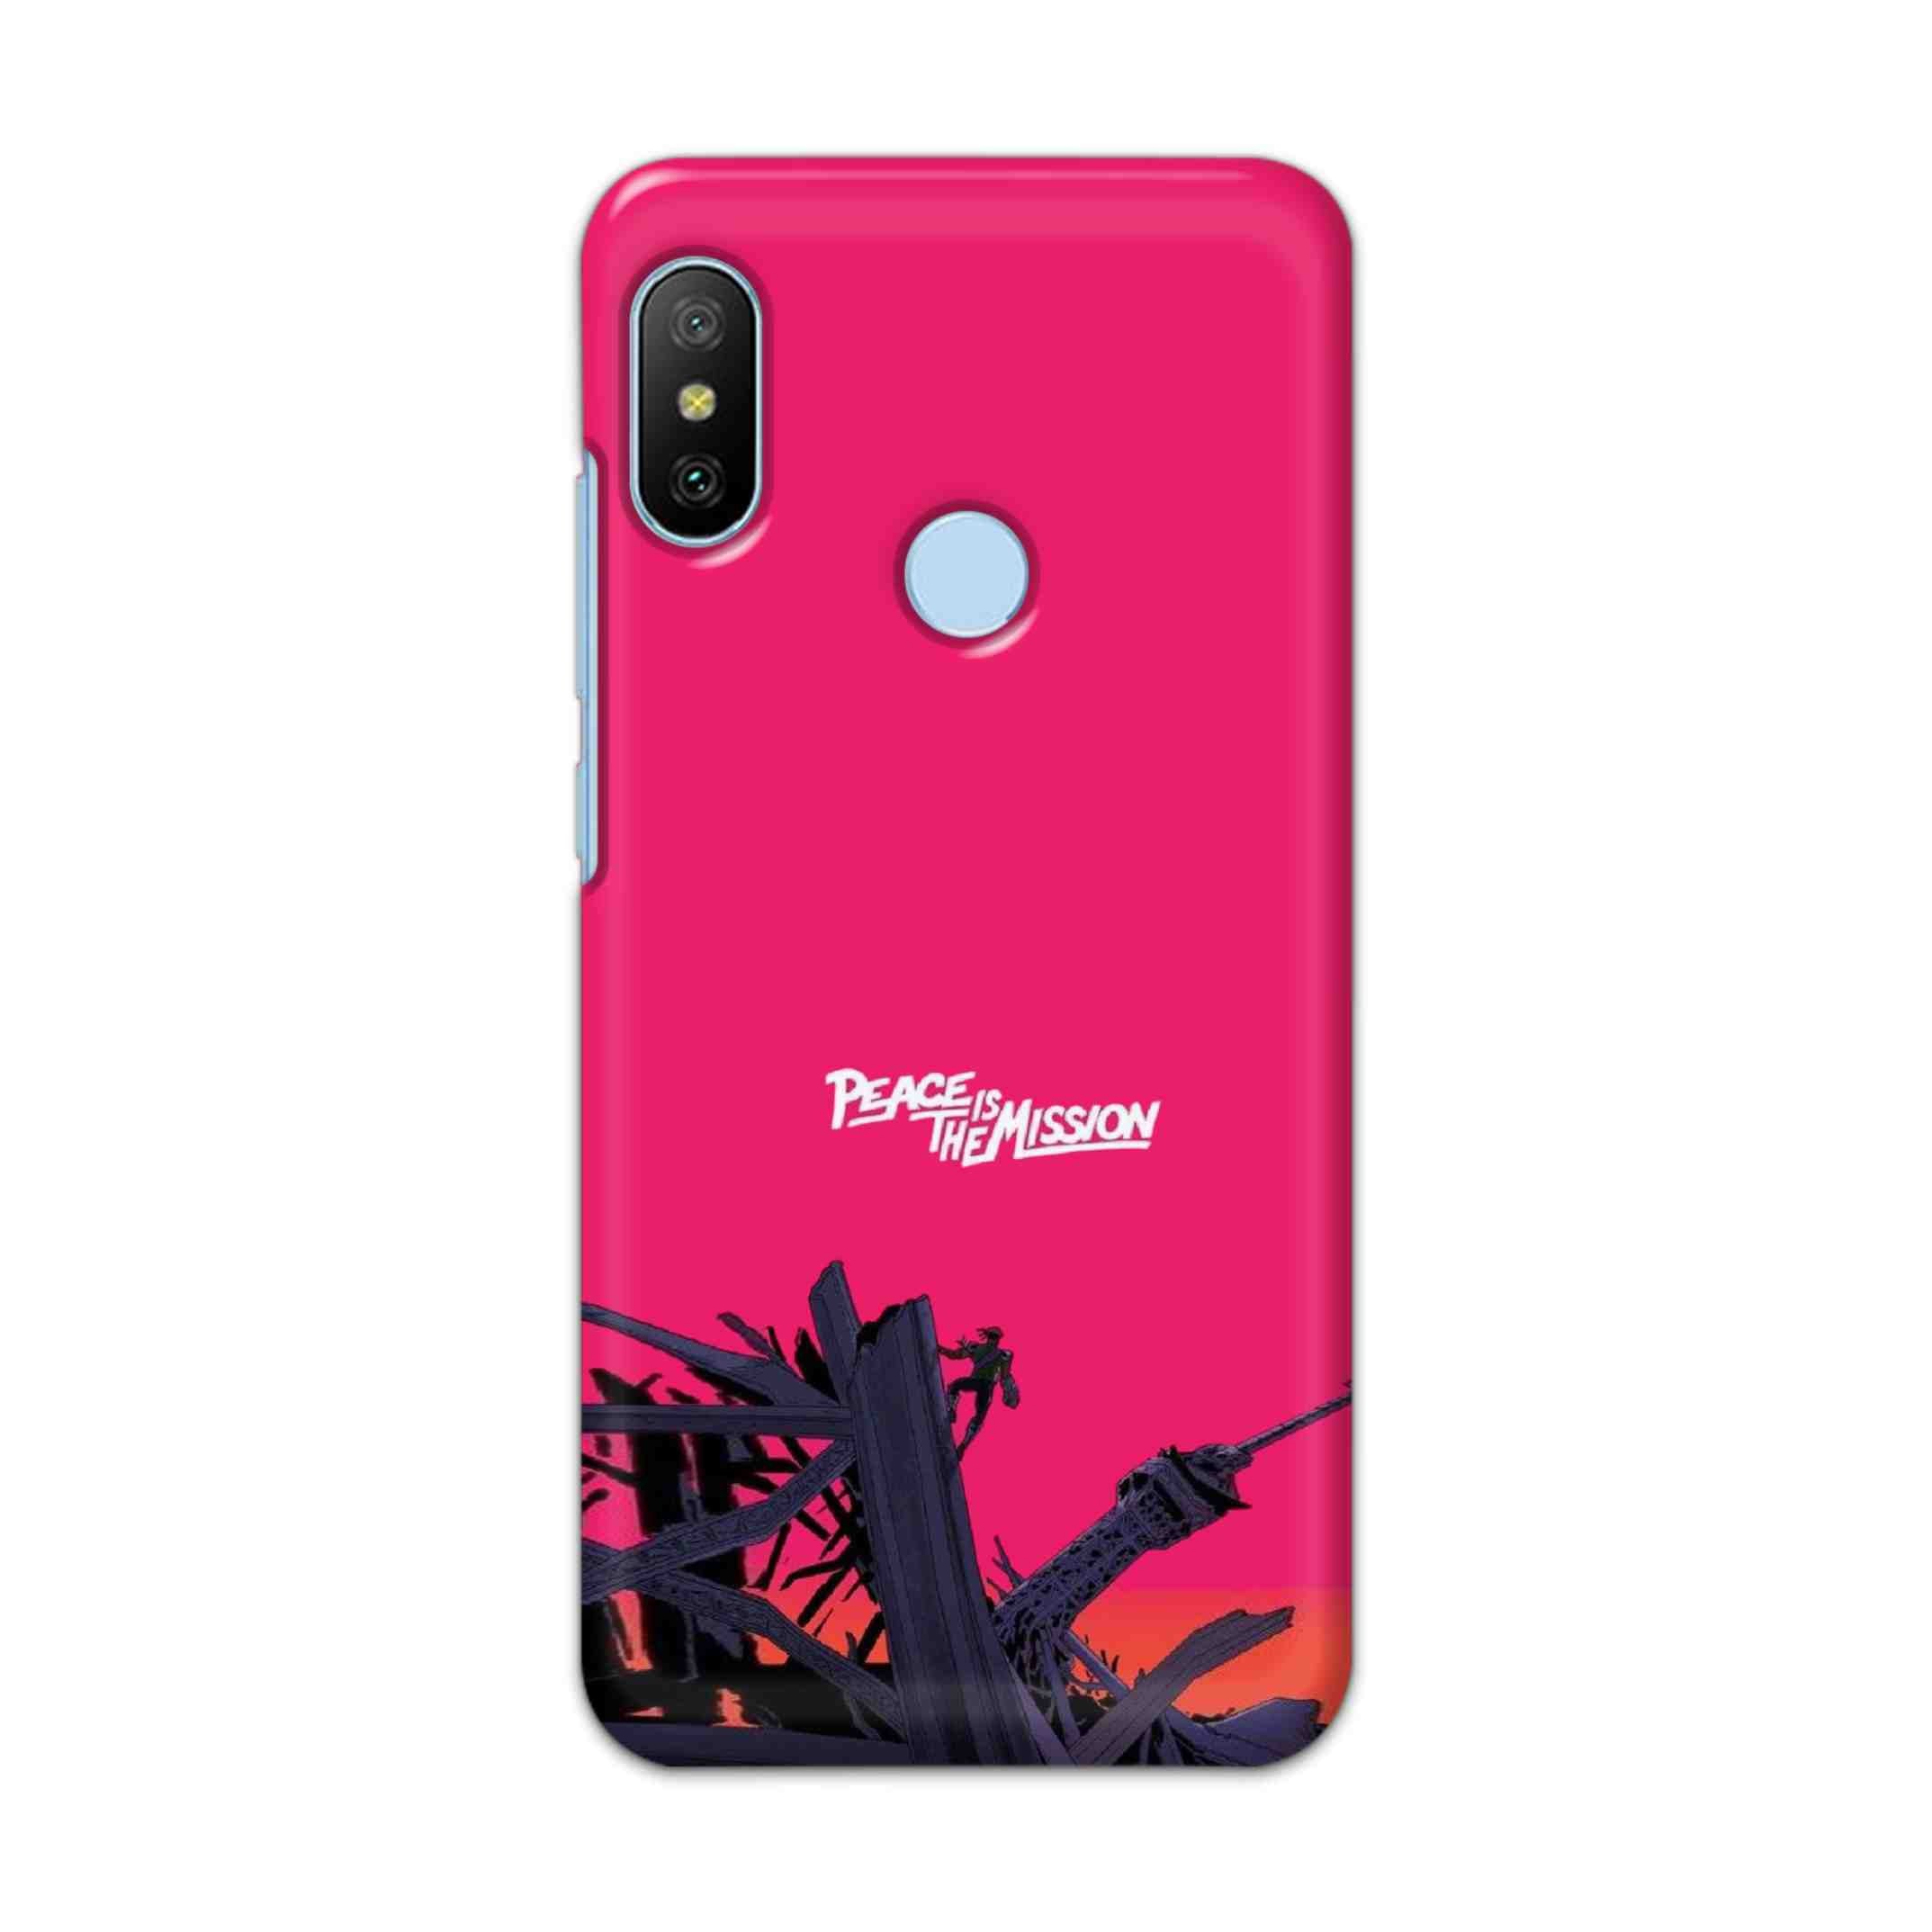 Buy Peace Is The Mission Hard Back Mobile Phone Case/Cover For Xiaomi Redmi 6 Pro Online